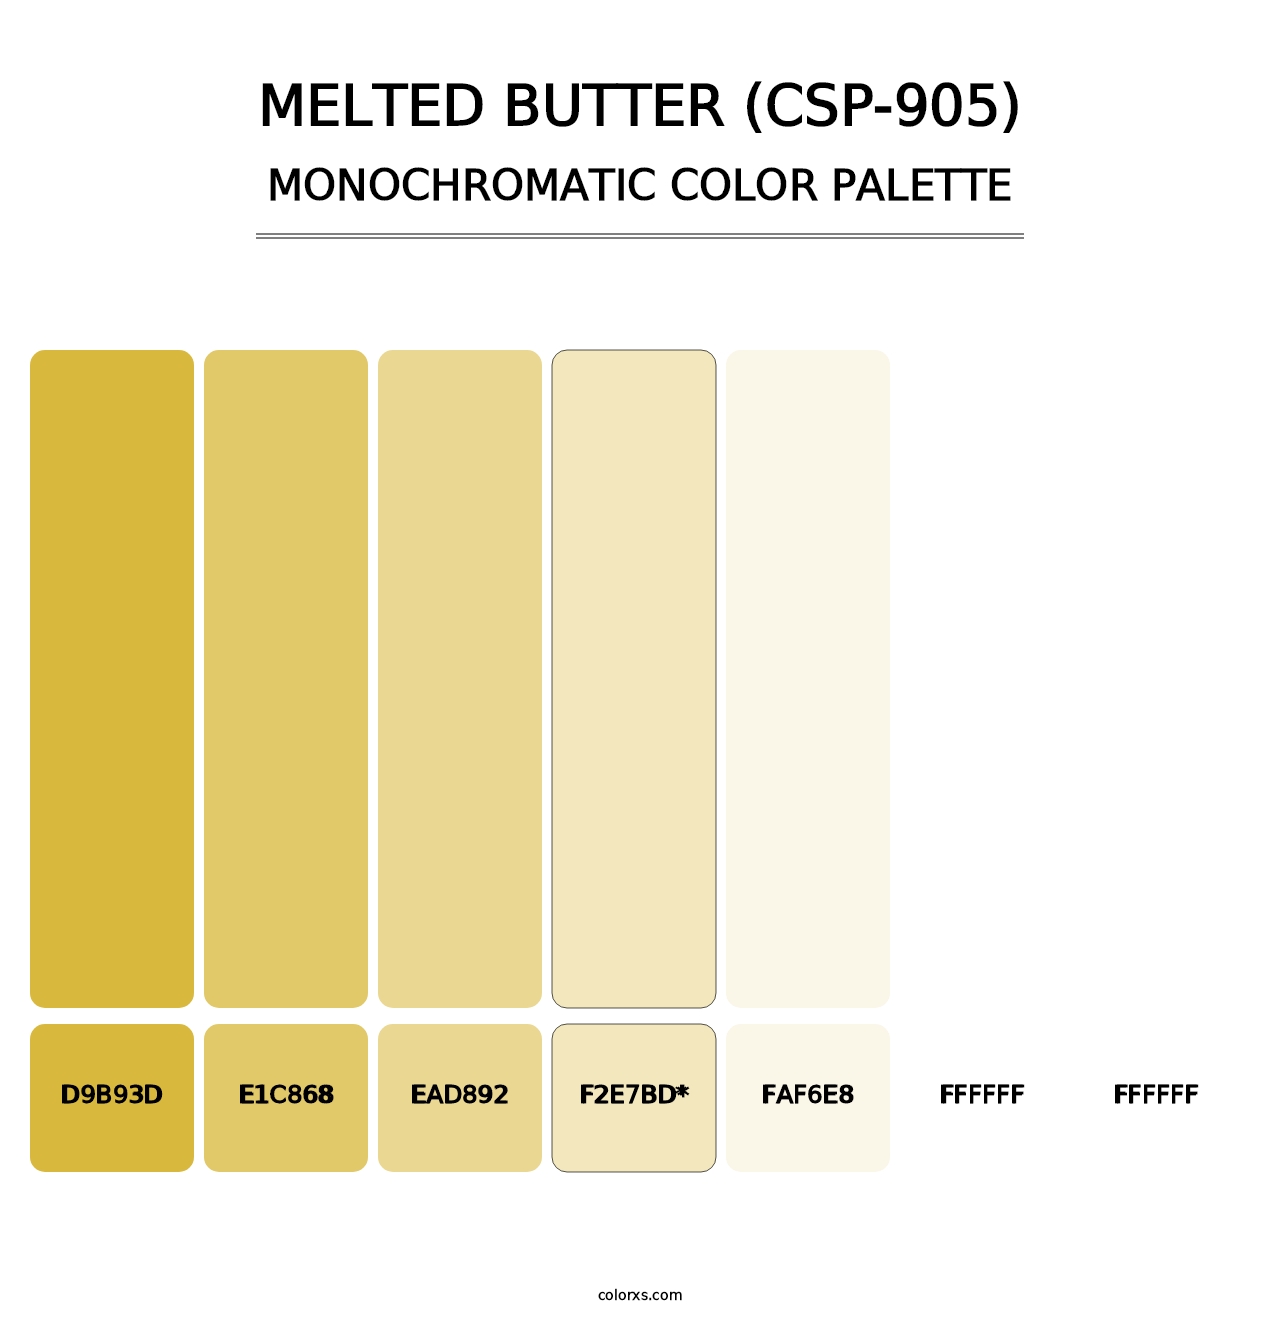 Melted Butter (CSP-905) - Monochromatic Color Palette